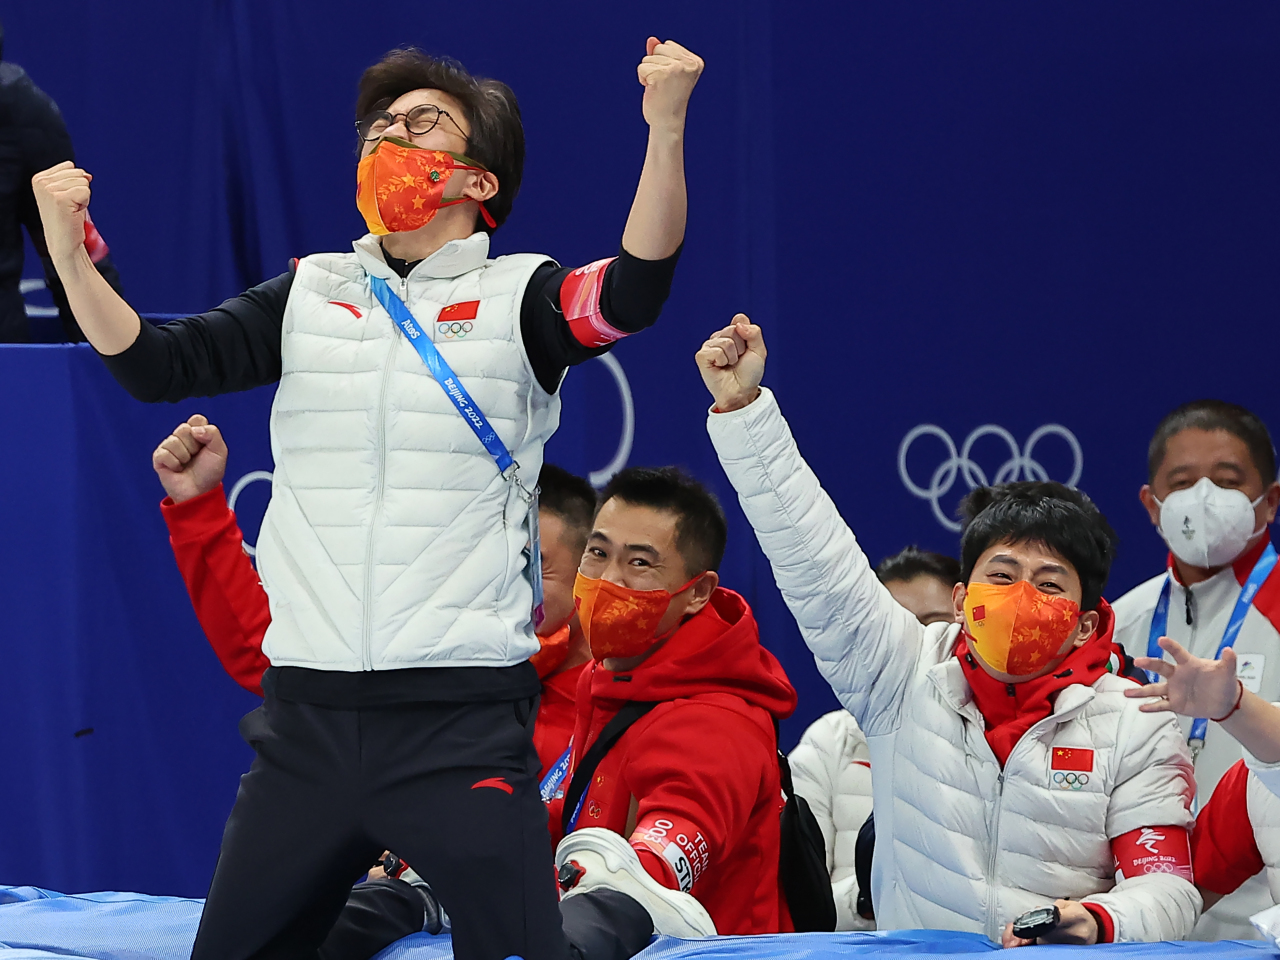 Kim Sun-tae (L) and Victor An (R), the South Korean-born head coach and technical coach of the Chinese national short track speed skating team, celebrate China's gold medal in the mixed team relay at the Beijing Winter Olympics at Capital Indoor Stadium in Beijing on Saturday. (Yonhap)